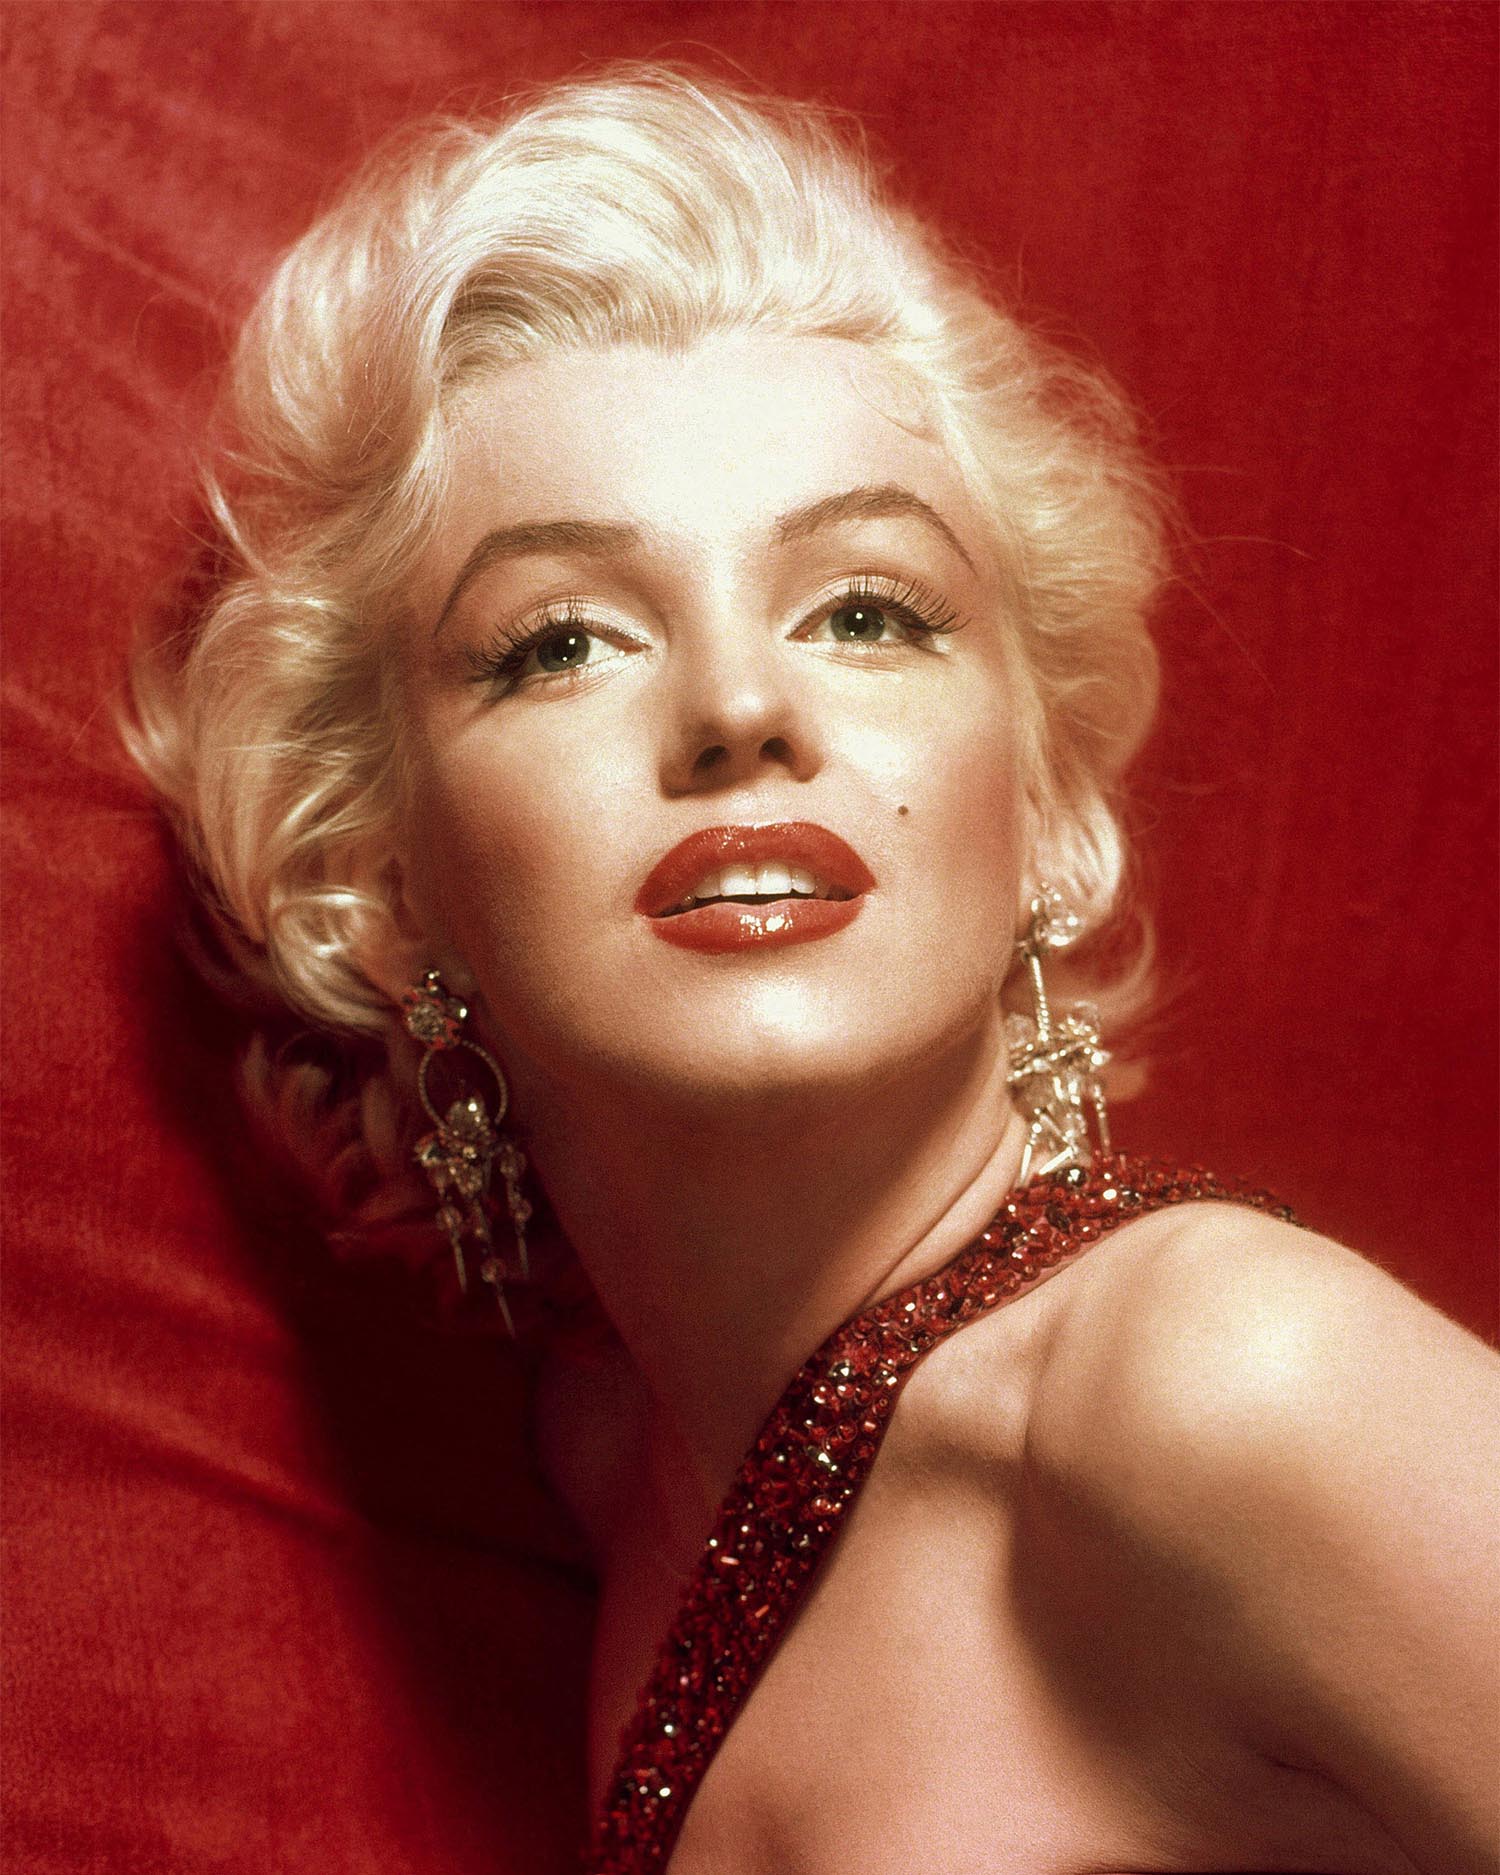 A glamorous Marilyn Monroe in a red dress.